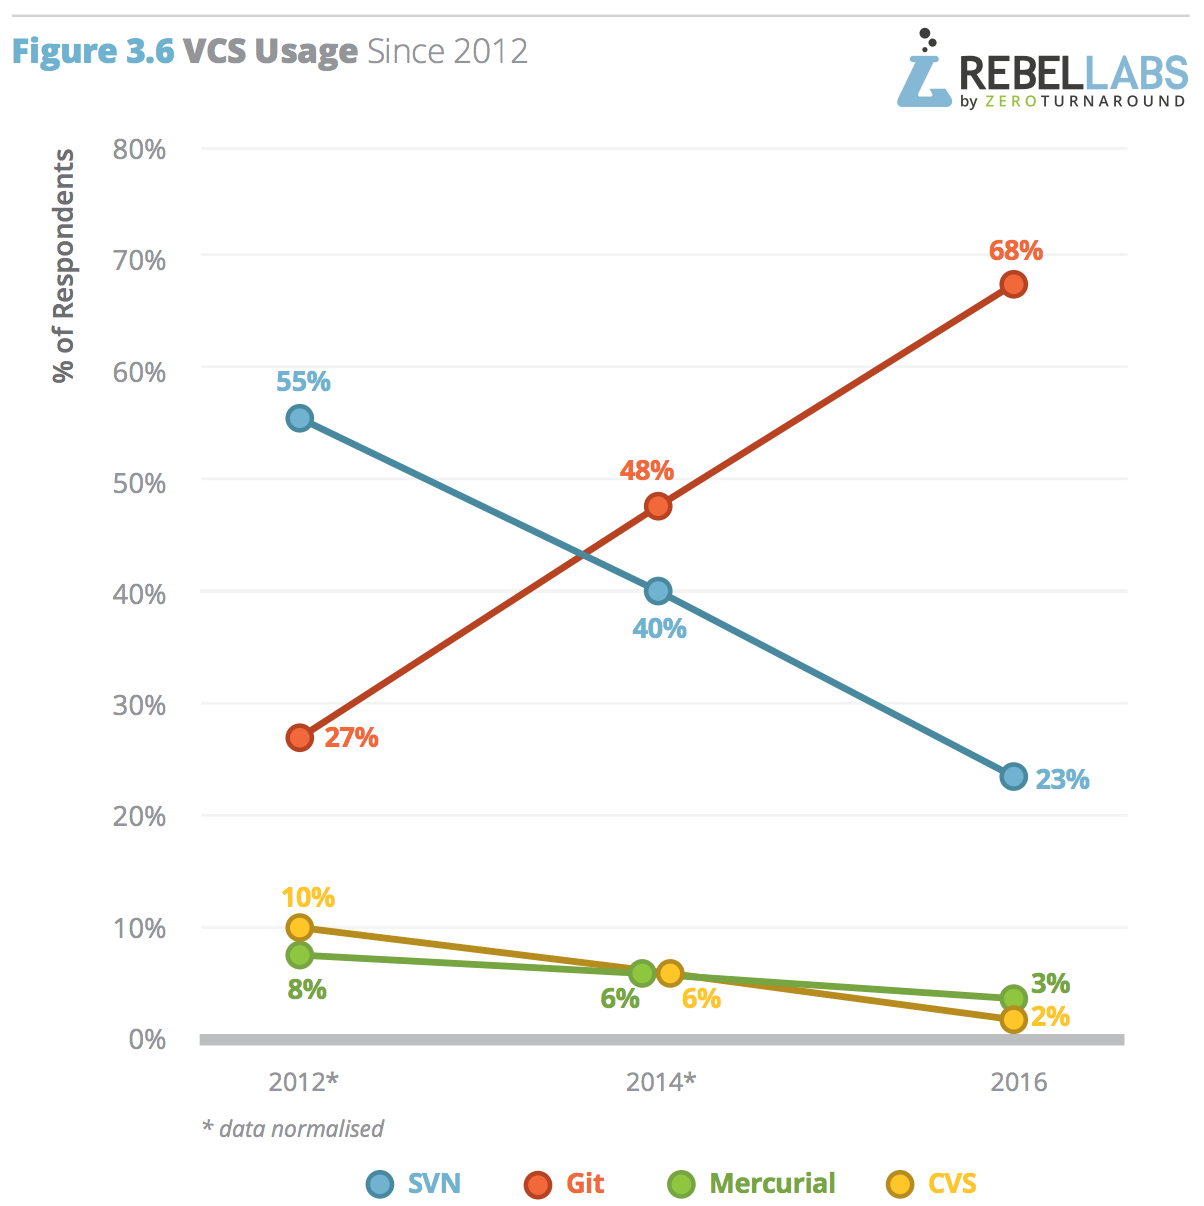 chart of vcs usage trends 2012-2016